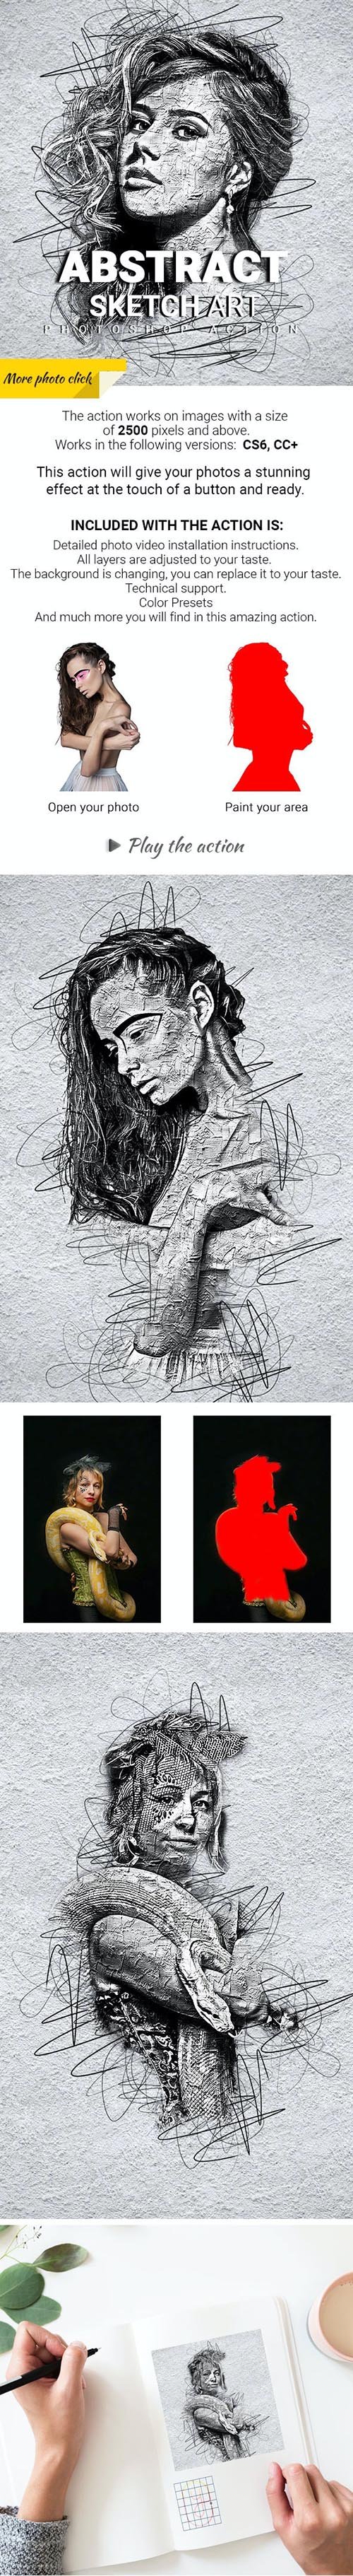 GraphicRiver - Abstract Sketch Art Photoshop Action - 29913460